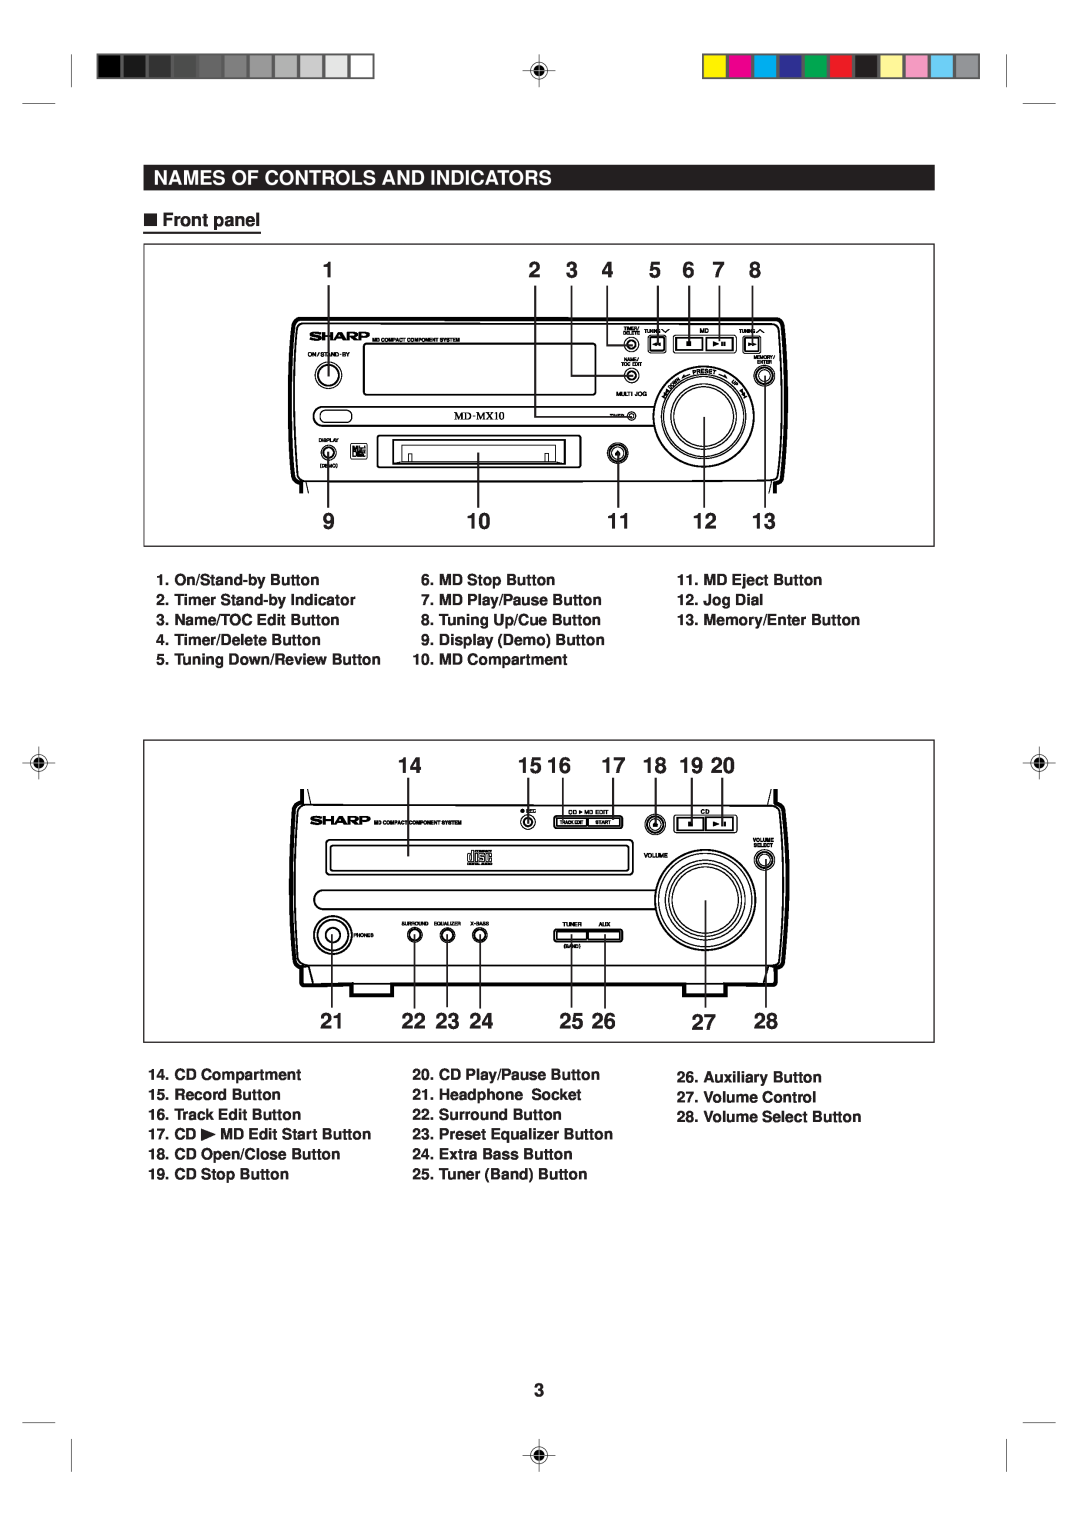 Sharp MD-MX10H operation manual Names Of Controls And Indicators, Front panel 